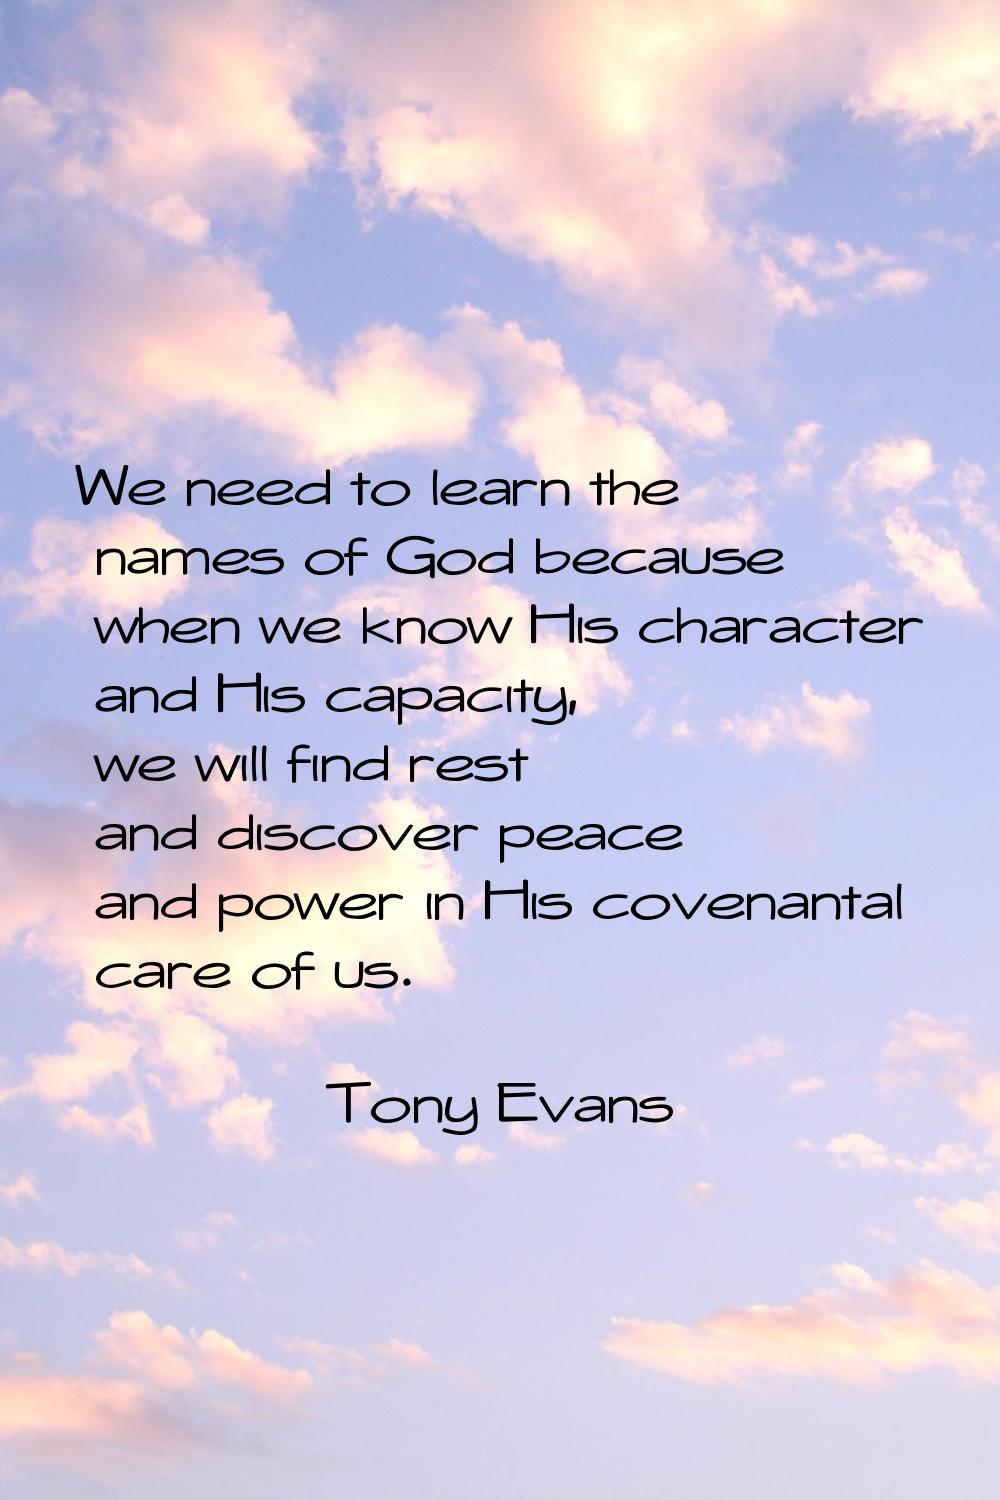 We need to learn the names of God because when we know His character and His capacity, we will find